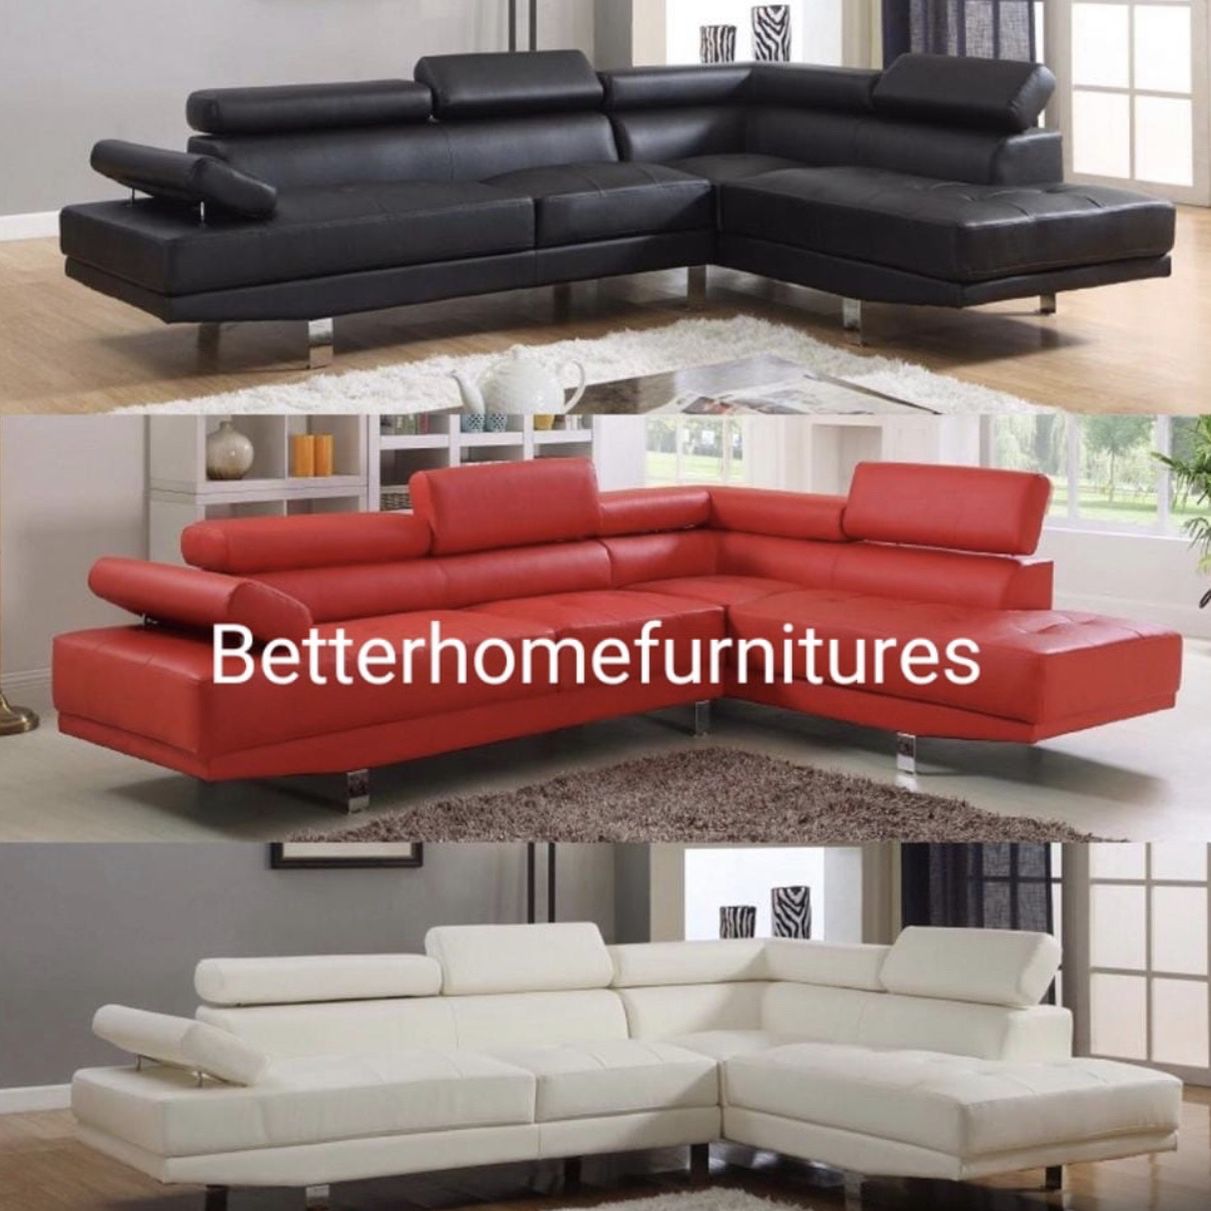 Brand new sectionals sofas in box- Flexible Payment options available $39 down. LOWEST PRICES(Message for details) 